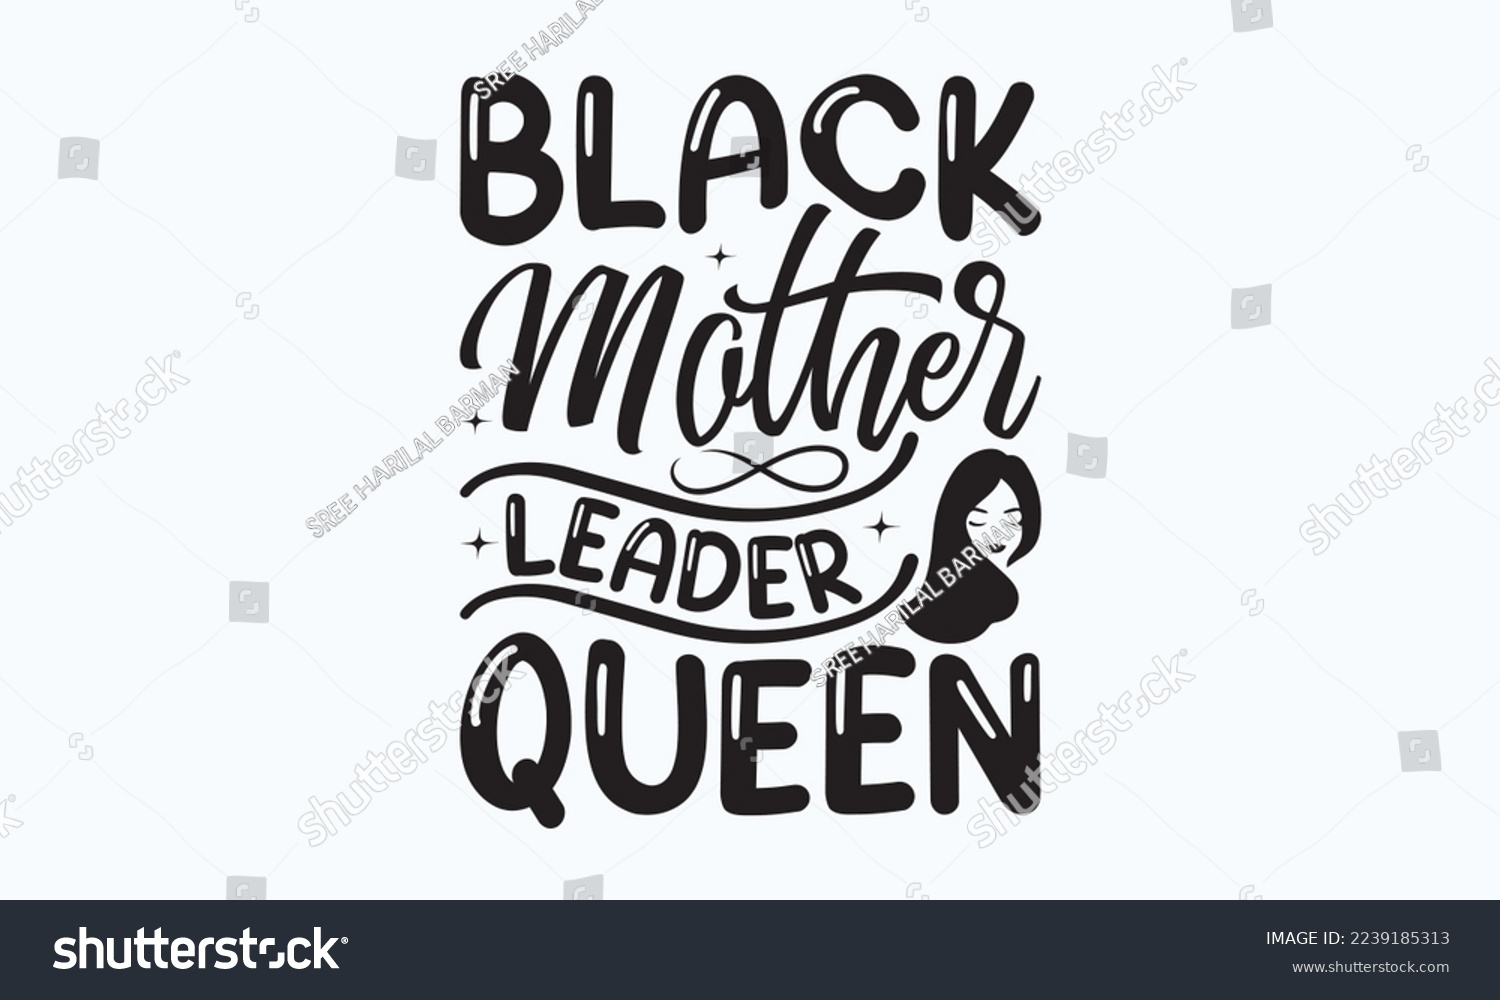 SVG of Black mother leader queen - President's day T-shirt Design, File Sports SVG Design, Sports typography t-shirt design, For stickers, Templet, mugs, etc. for Cutting, cards, and flyers. svg